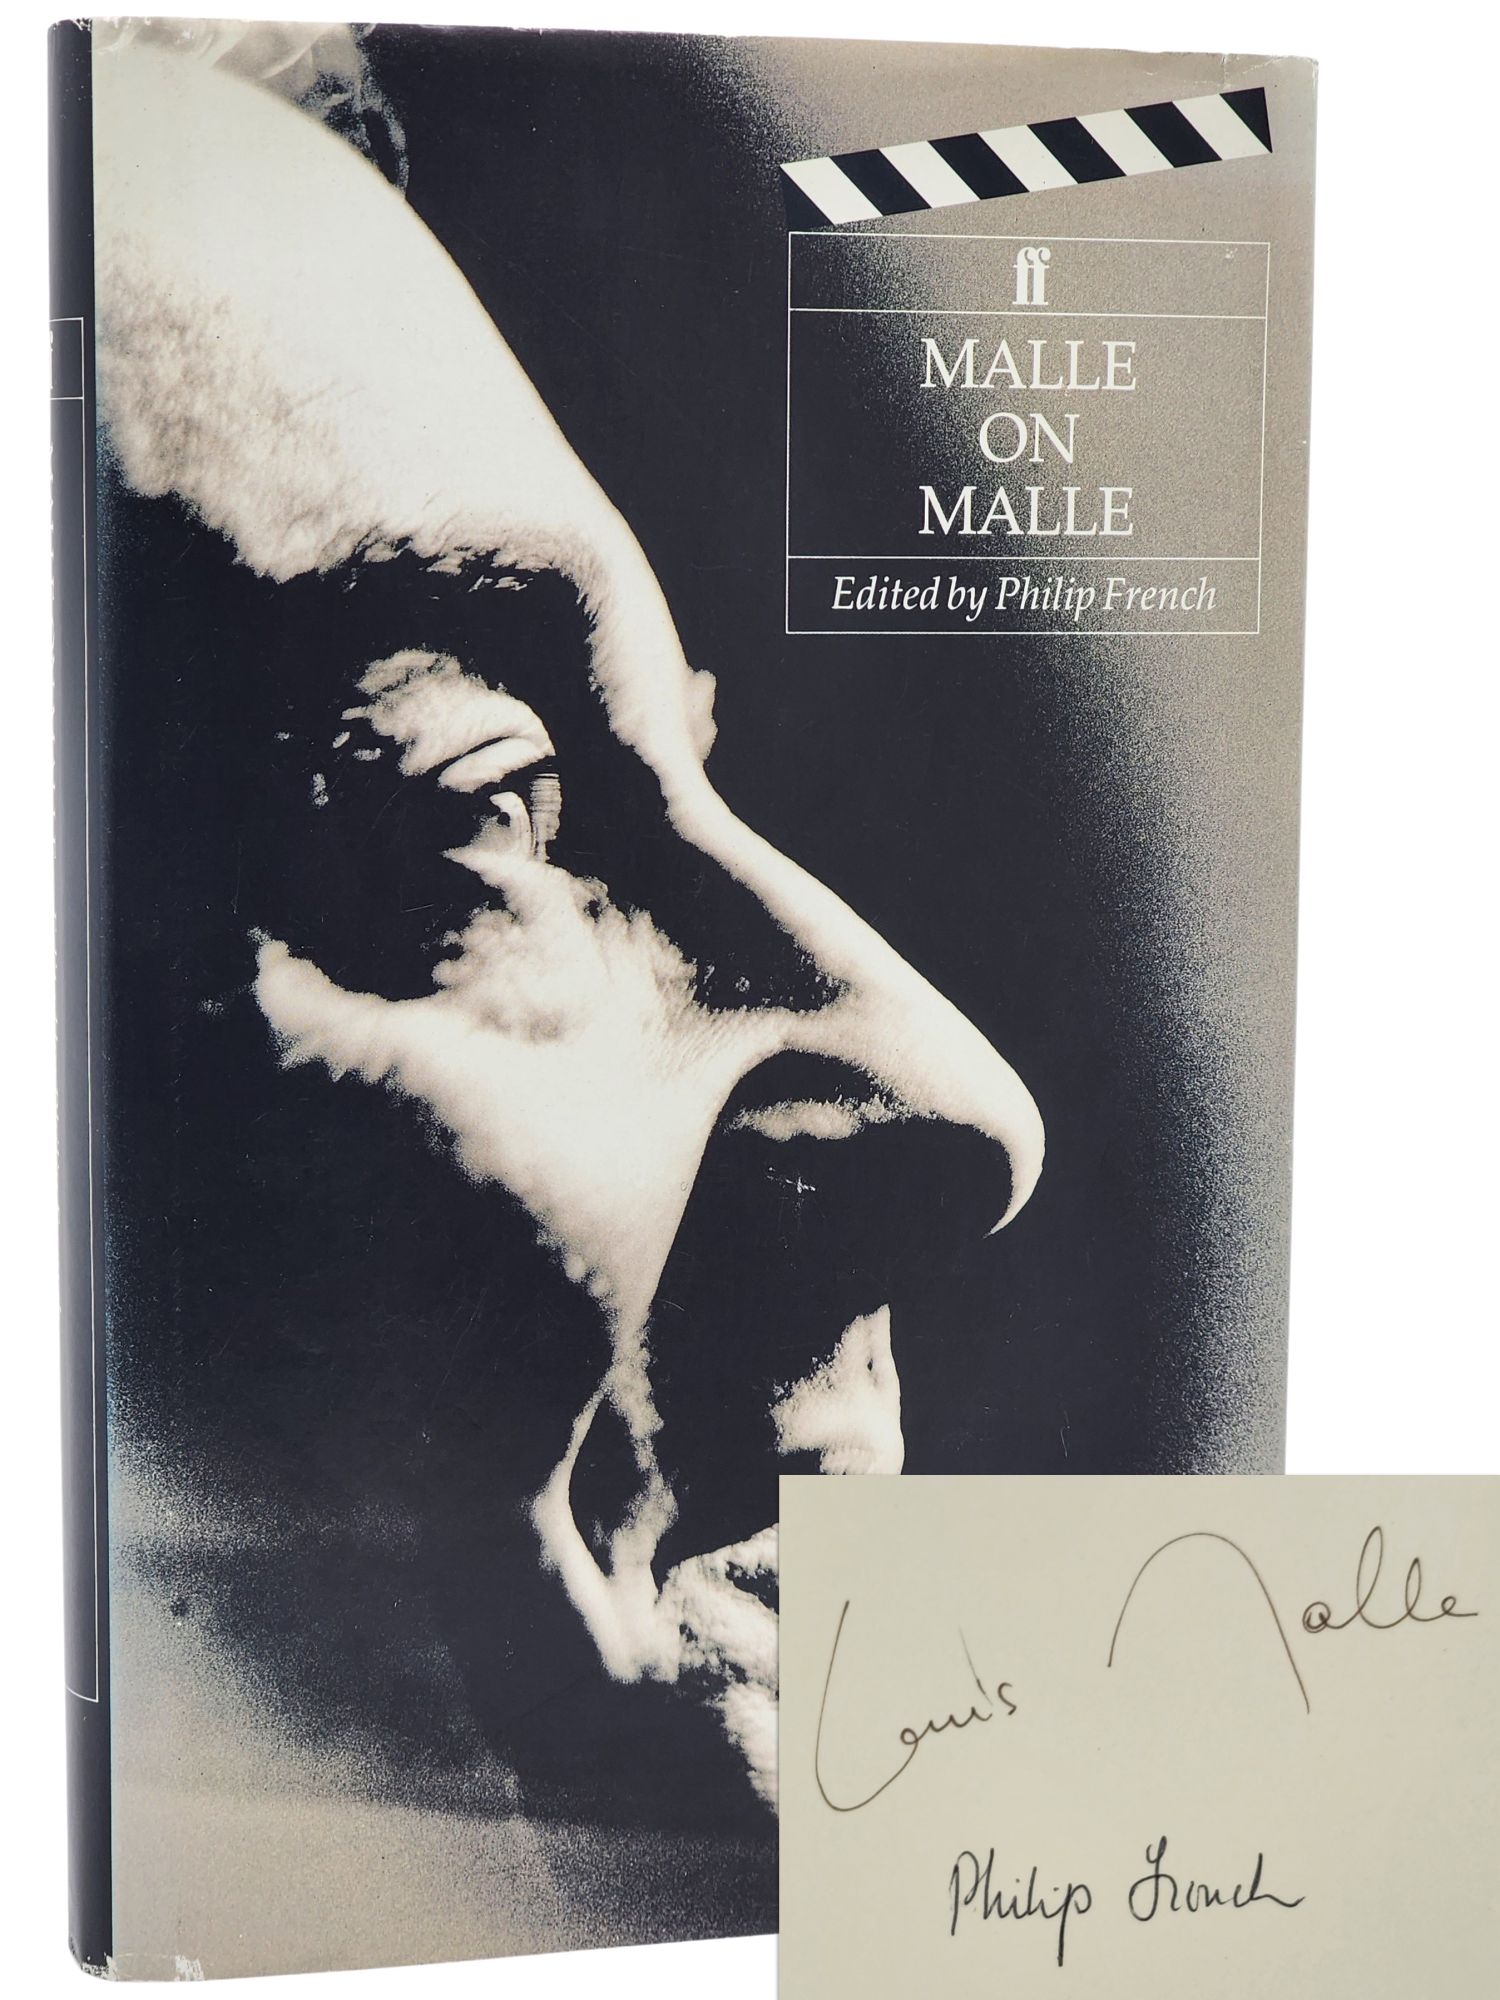 MALLE ON MALLE Edited by Philip French SIGNED BY BOTH